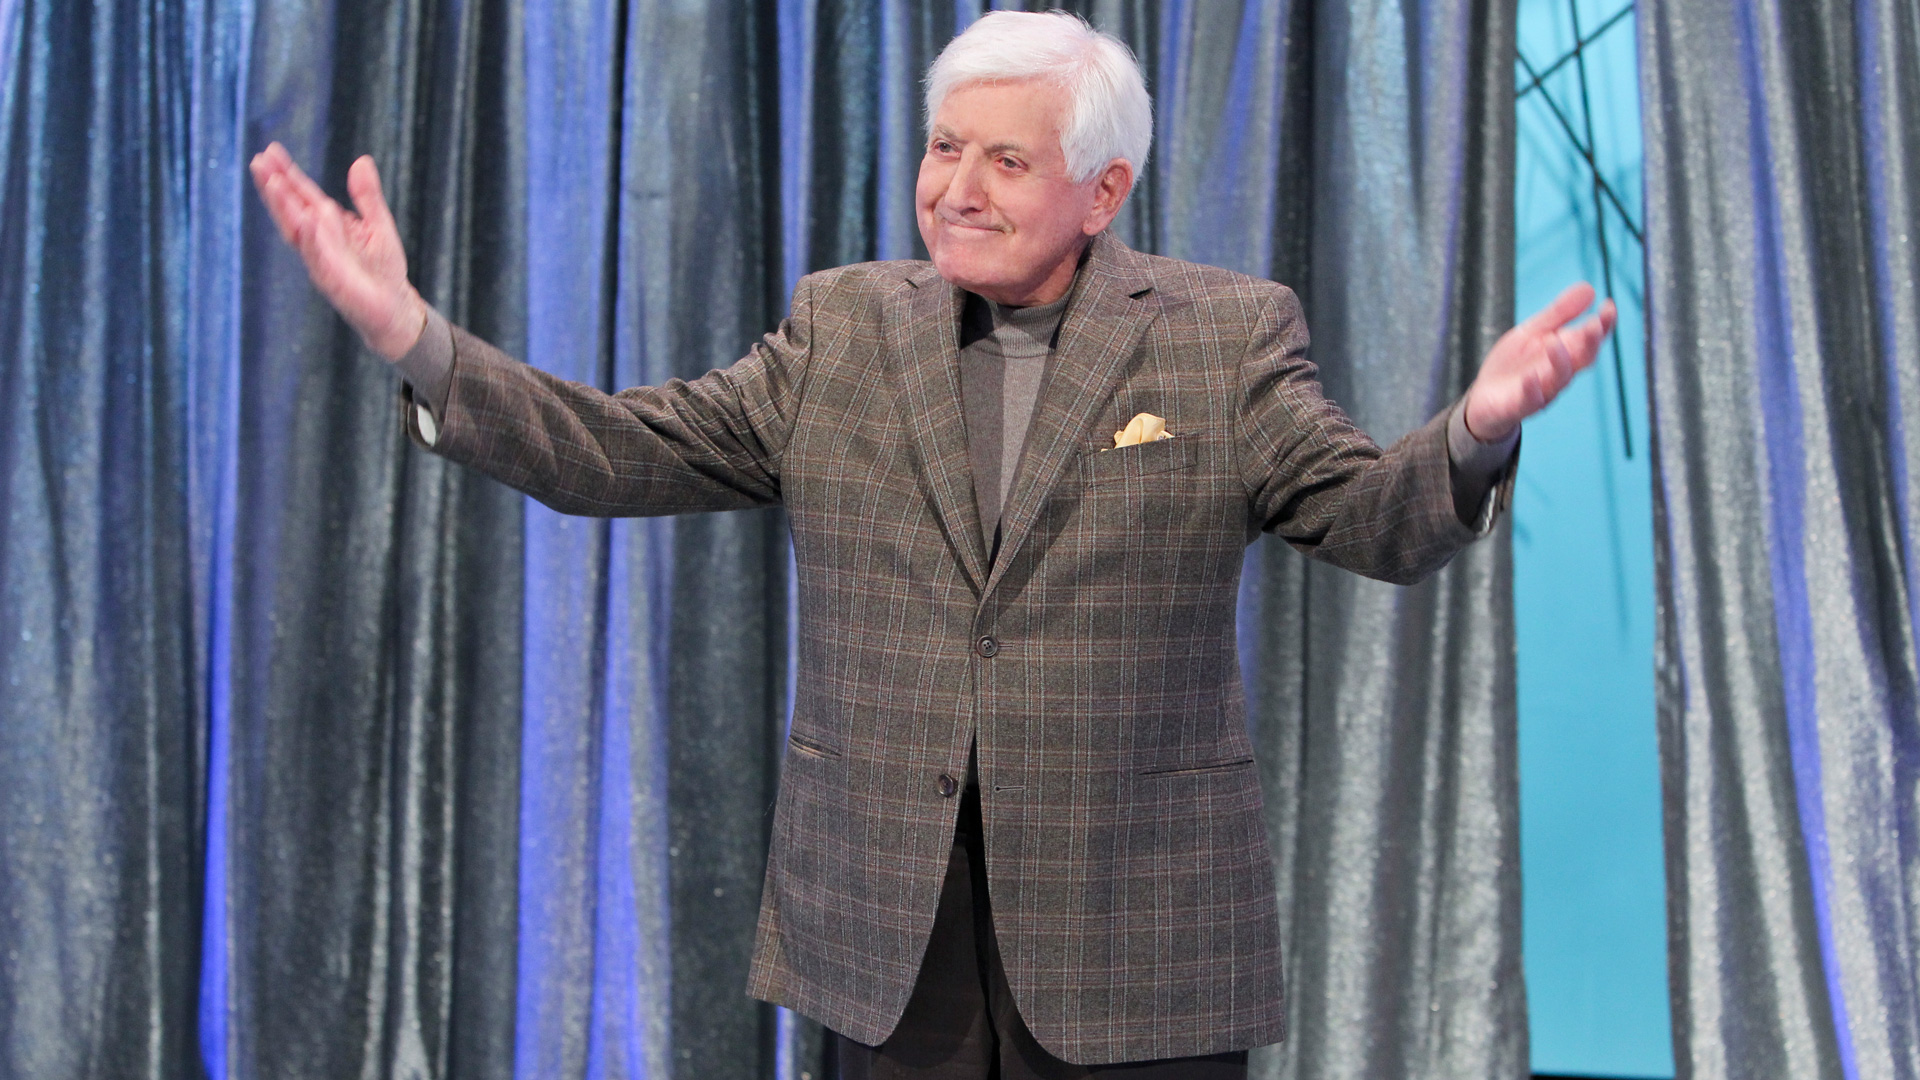 Monty Hall, co-creator and former host of Let's Make A Deal, has passed away.